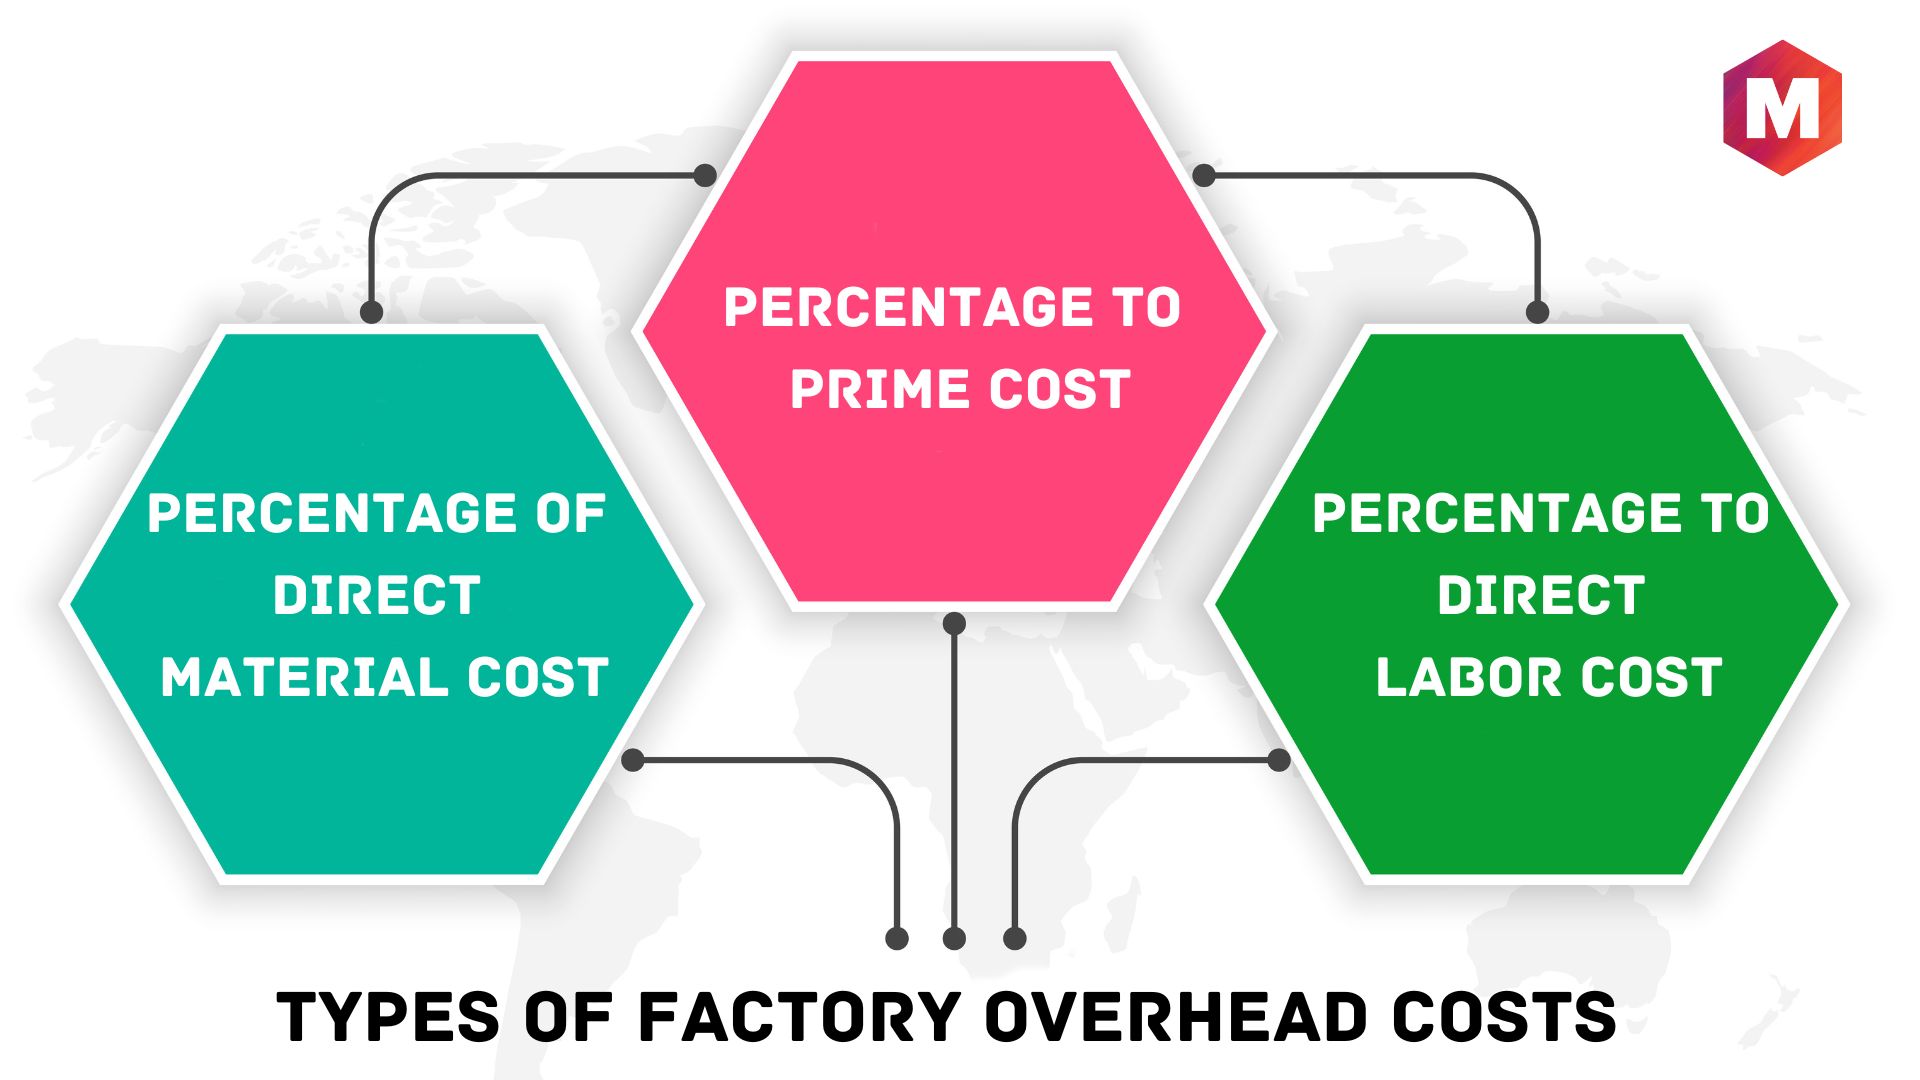 Types of factory overhead costs